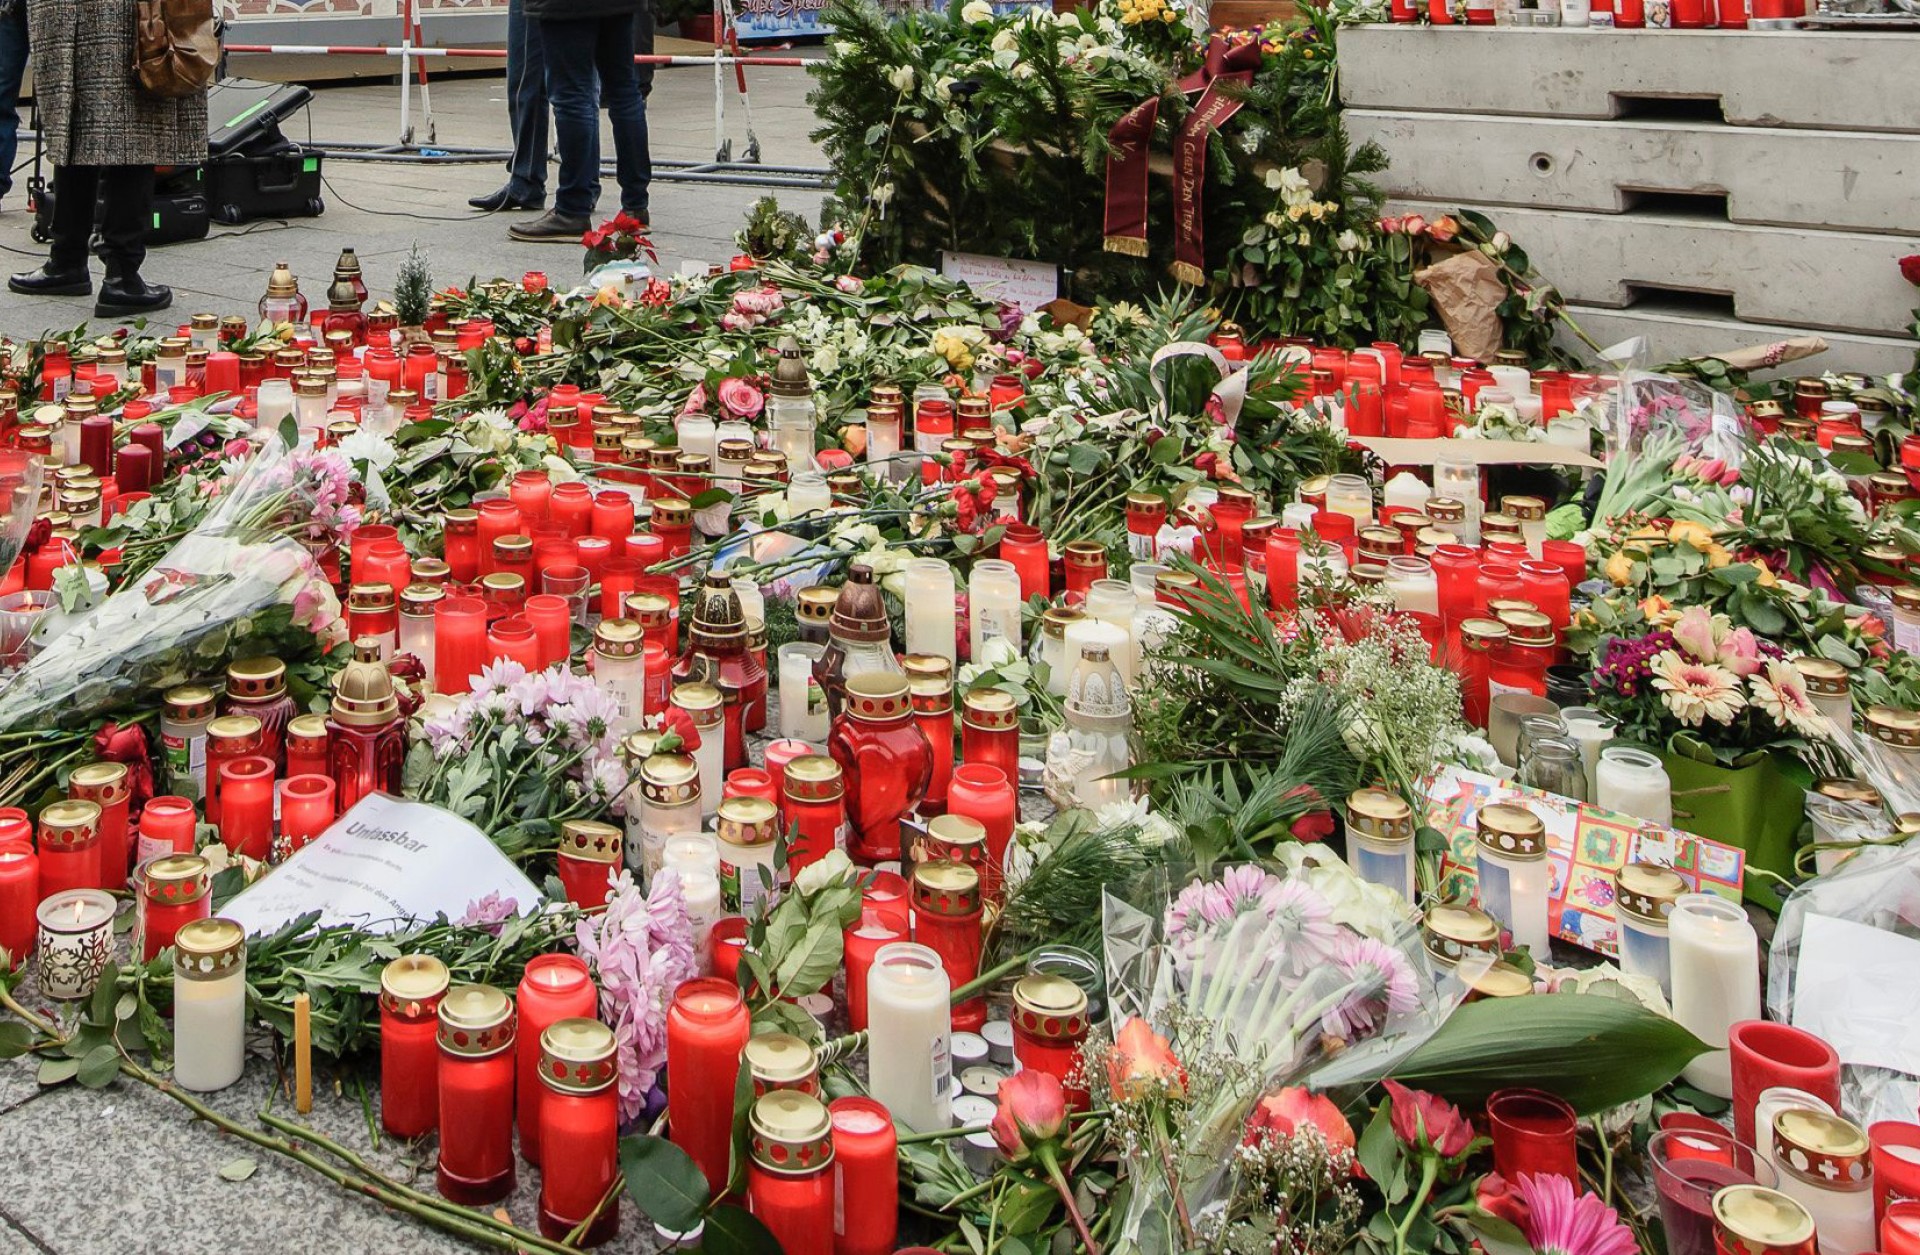 Letter From Berlin: Sadness, Not Shock, After Holiday Attack